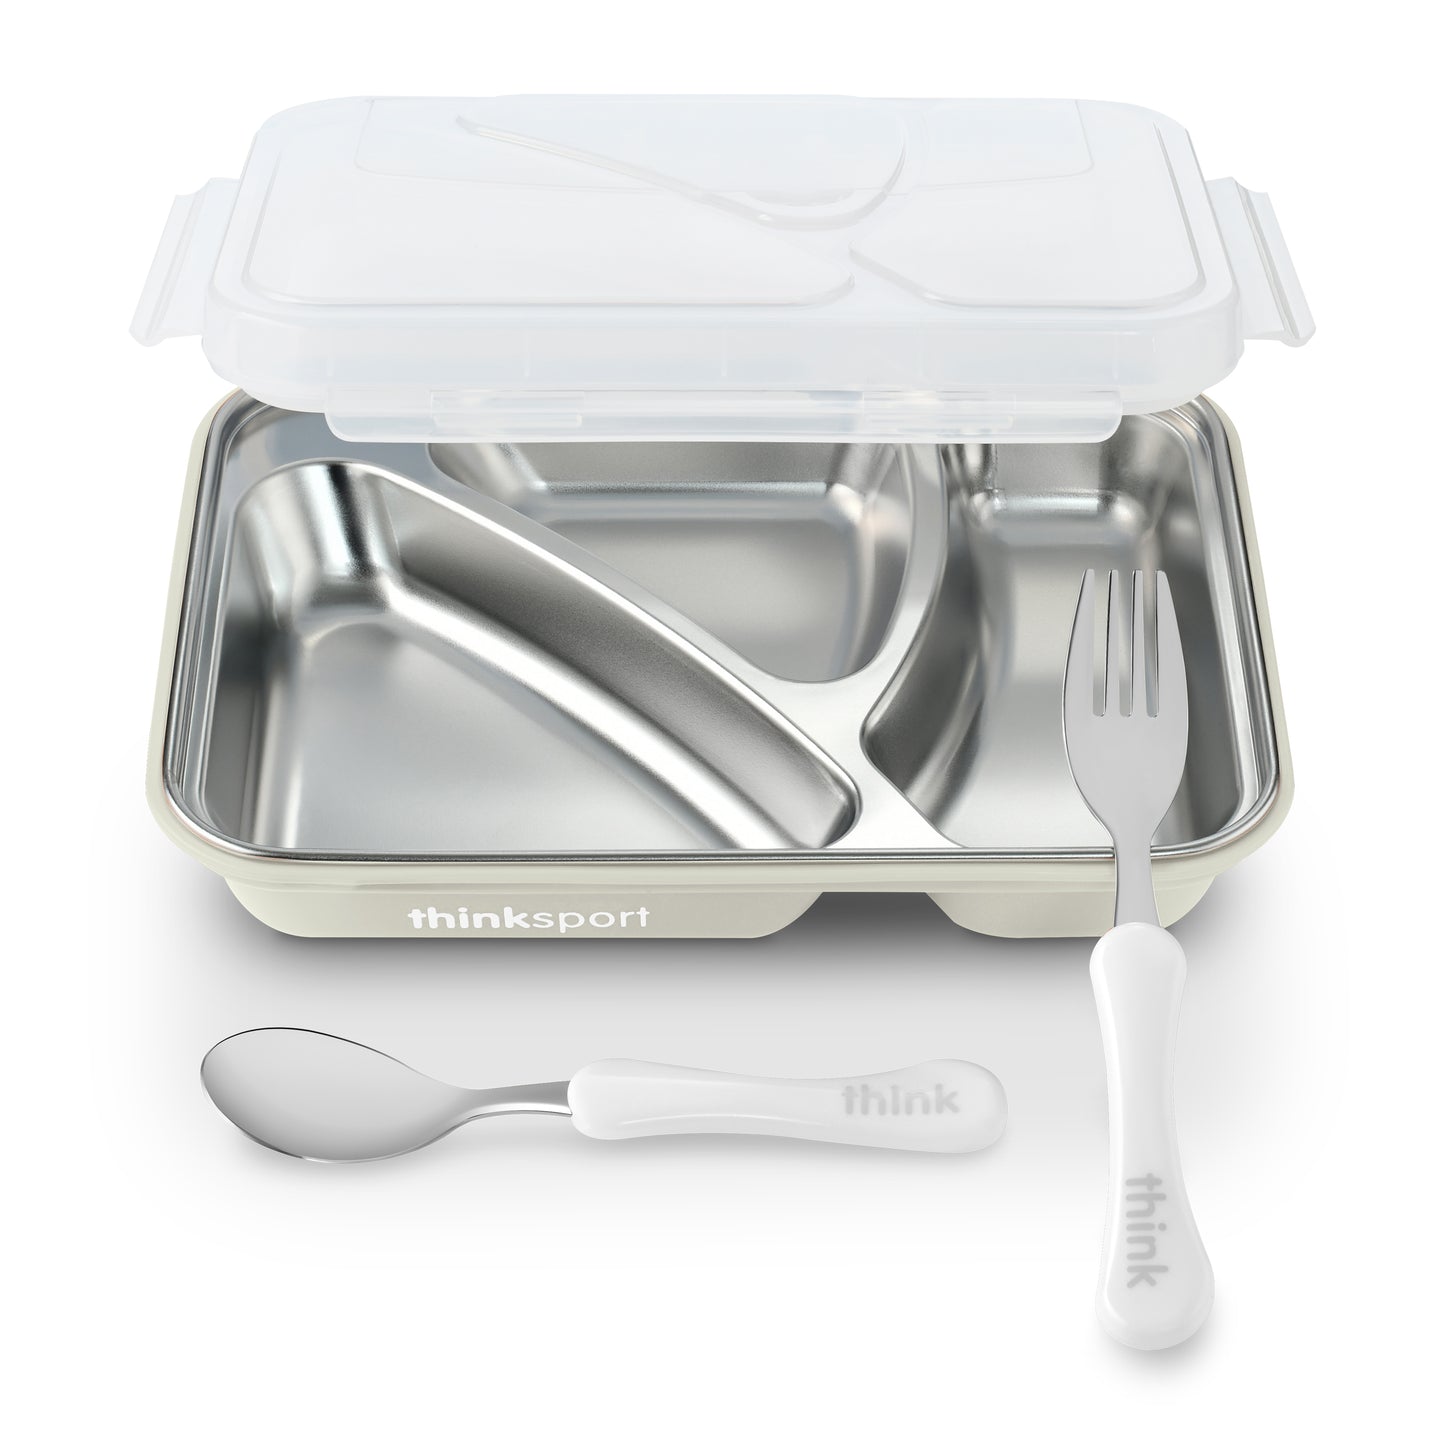 Thinksport Airtight Lunch Container with Fork & Spoon